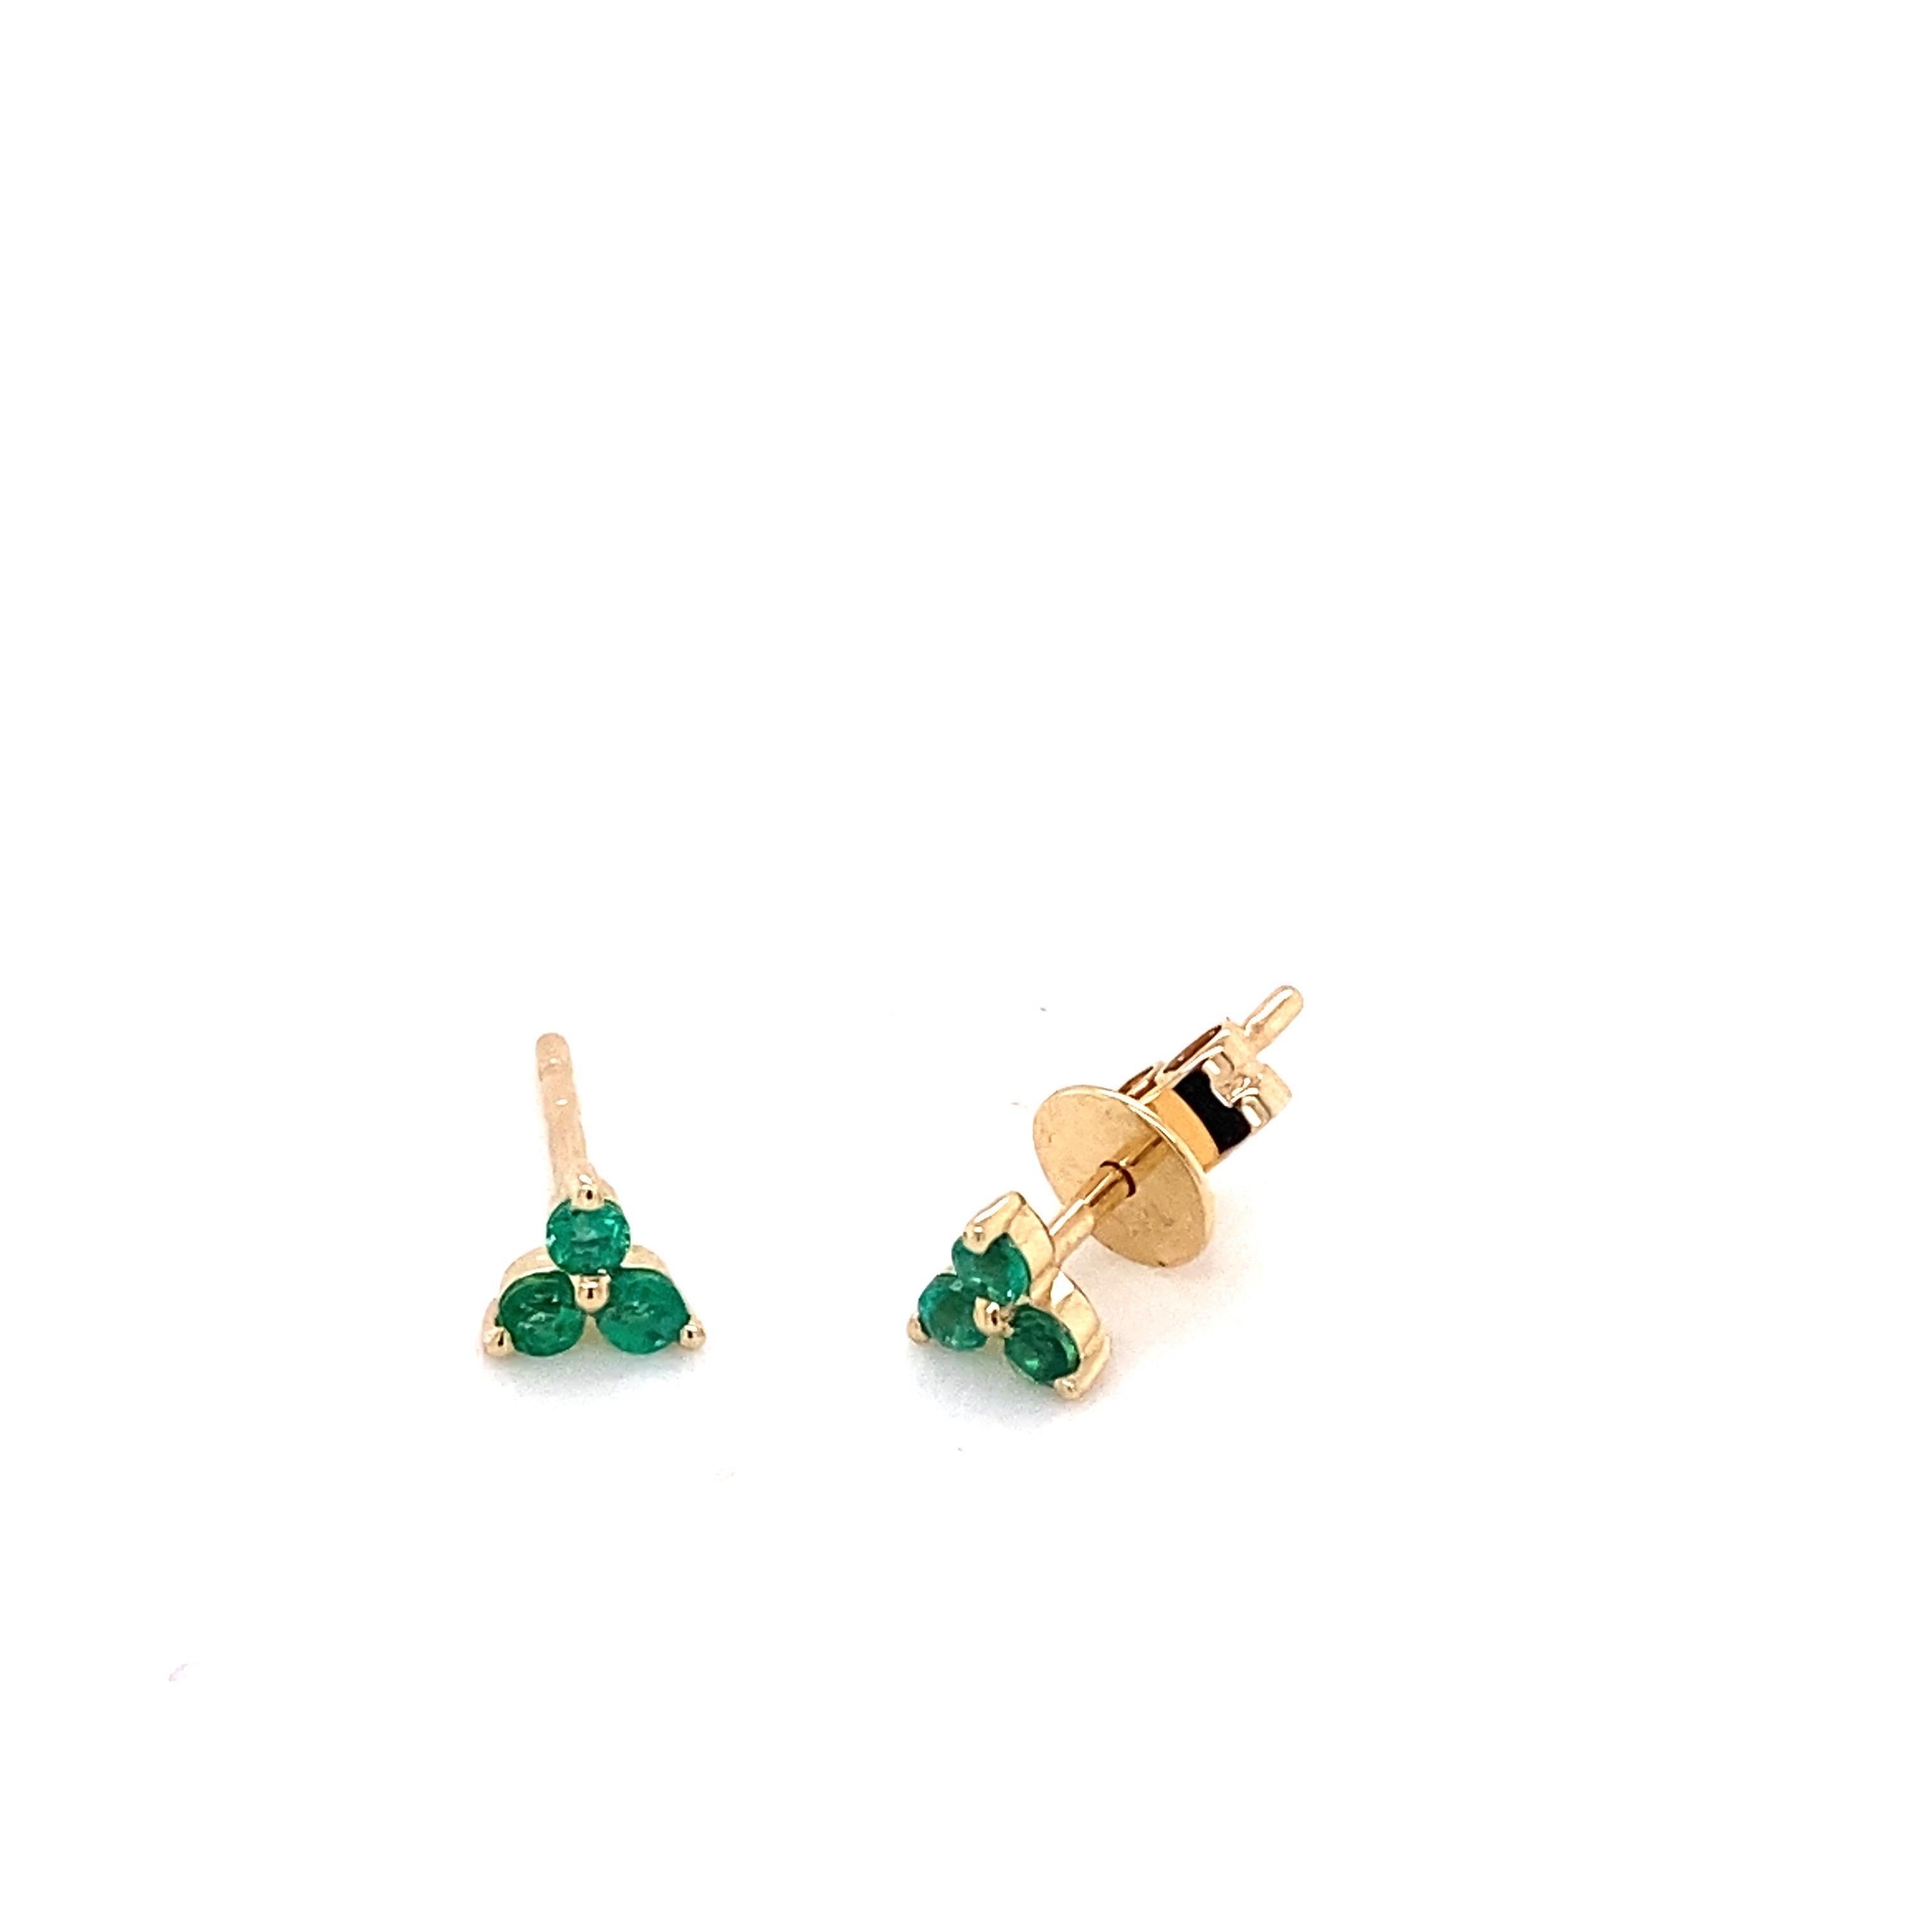 Round Cut 0.16 Carat Total Weight Emerald Petite Stud Earrings, 14 Karat Yellow Gold For Sale